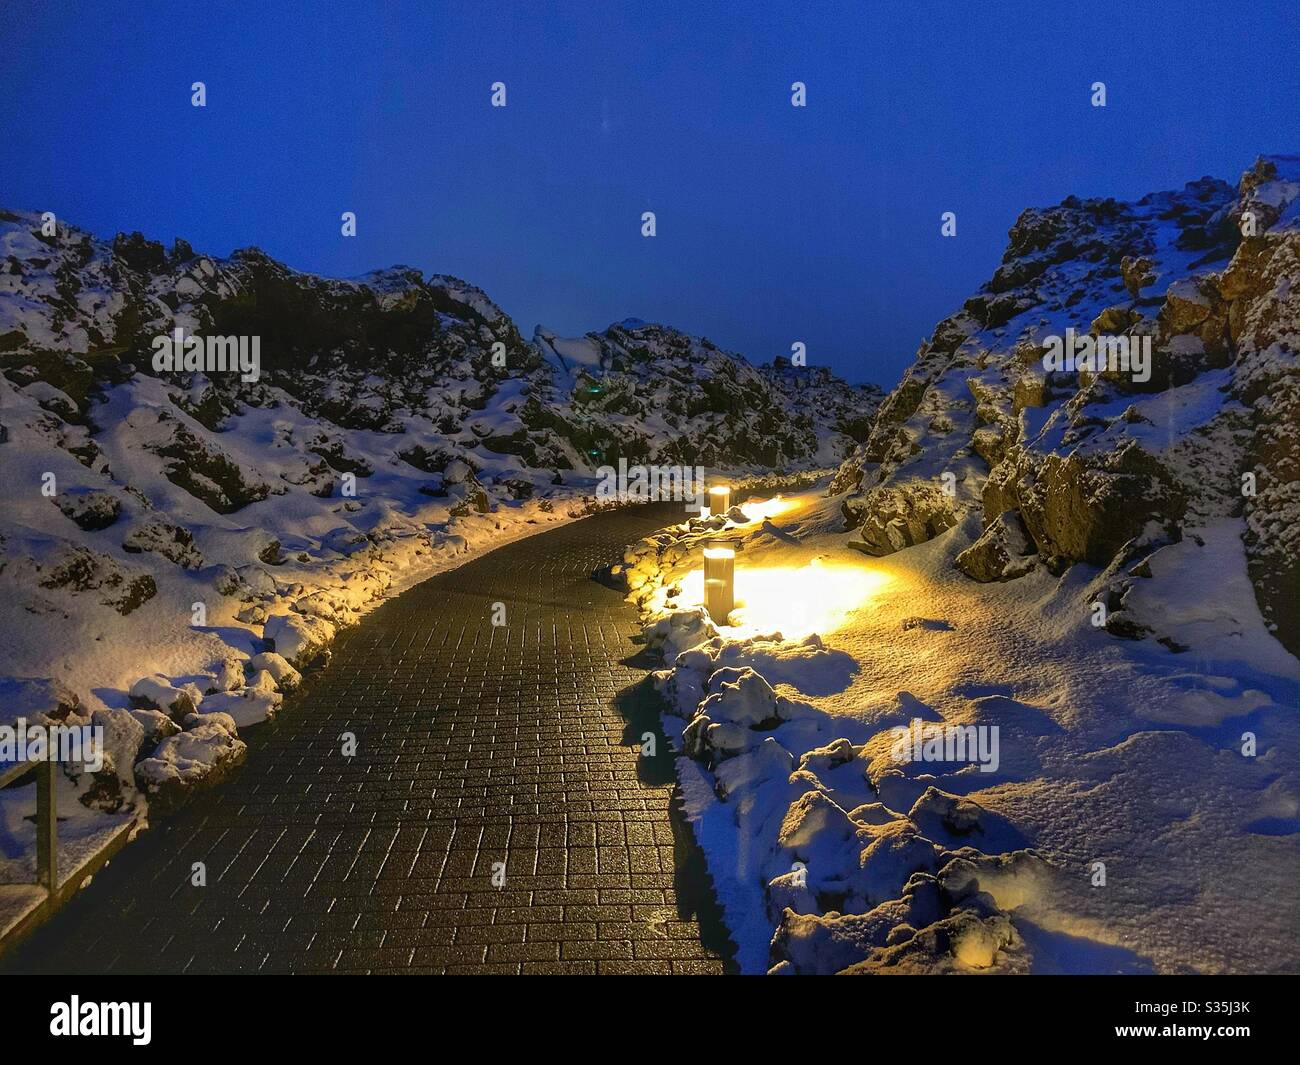 Pathway surrounded by black volcanic rock, covered in snow and lit by walkway lighting at blue hour. Entrance to The Blue Lagoon, Iceland. Stock Photo